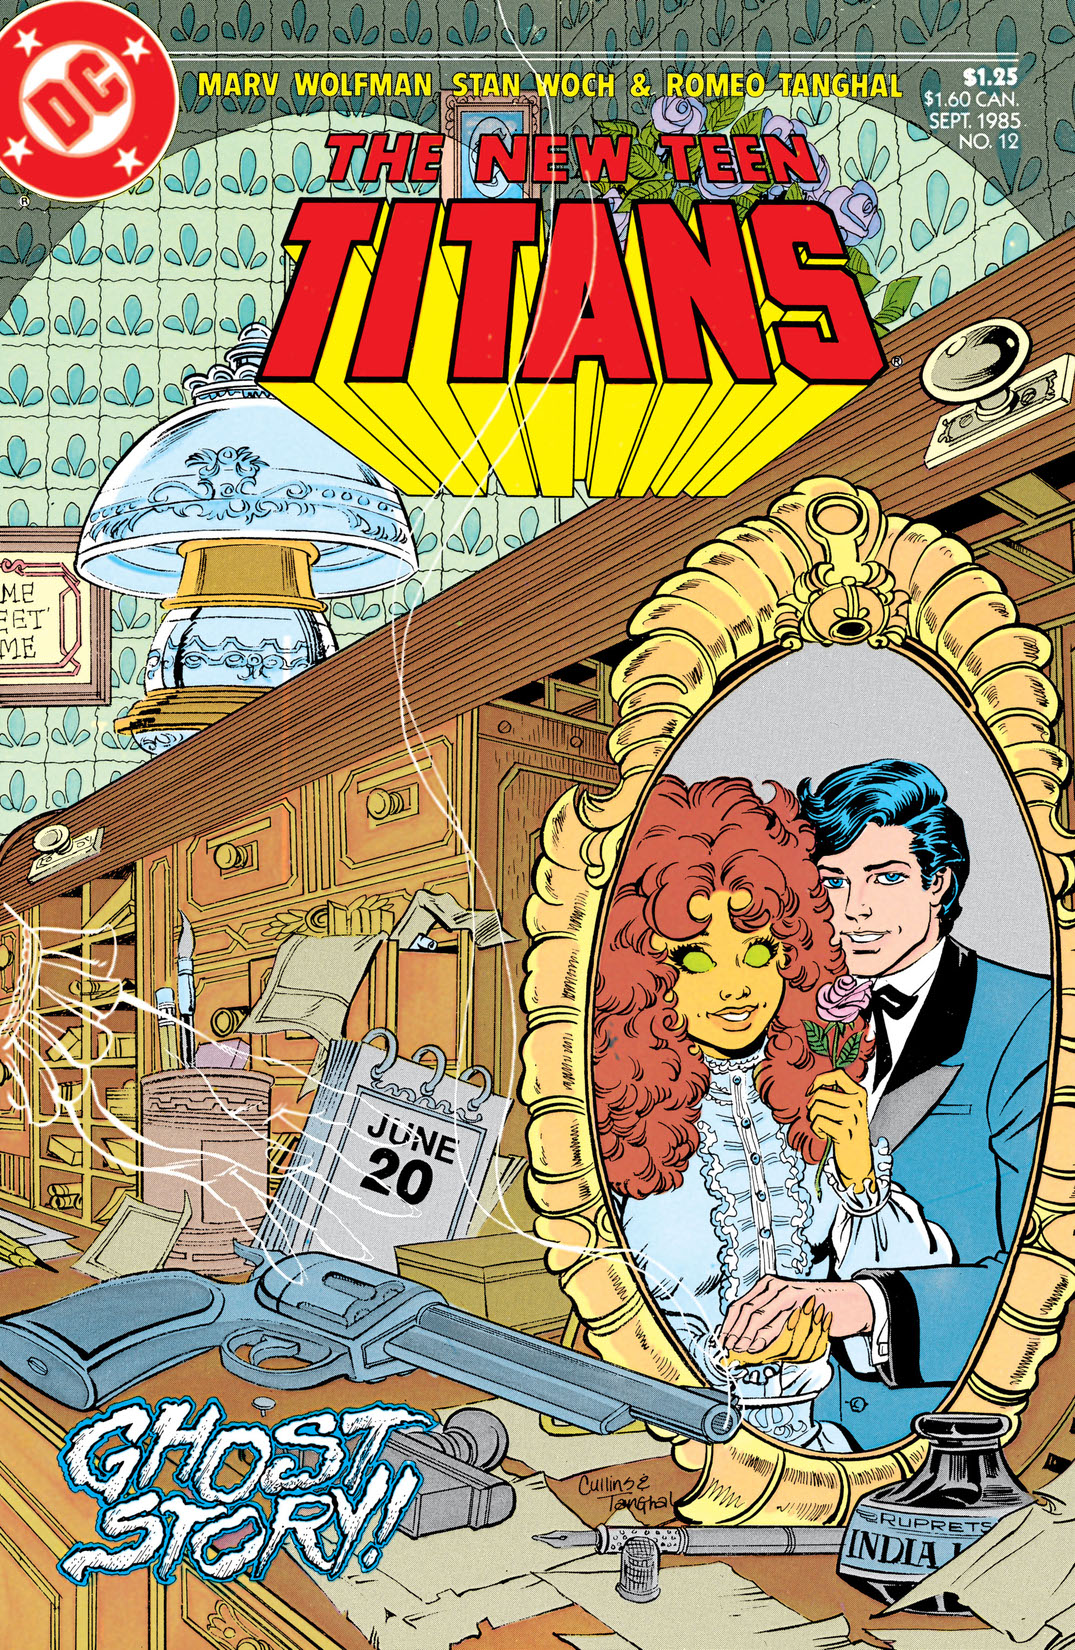 The New Teen Titans #12 preview images